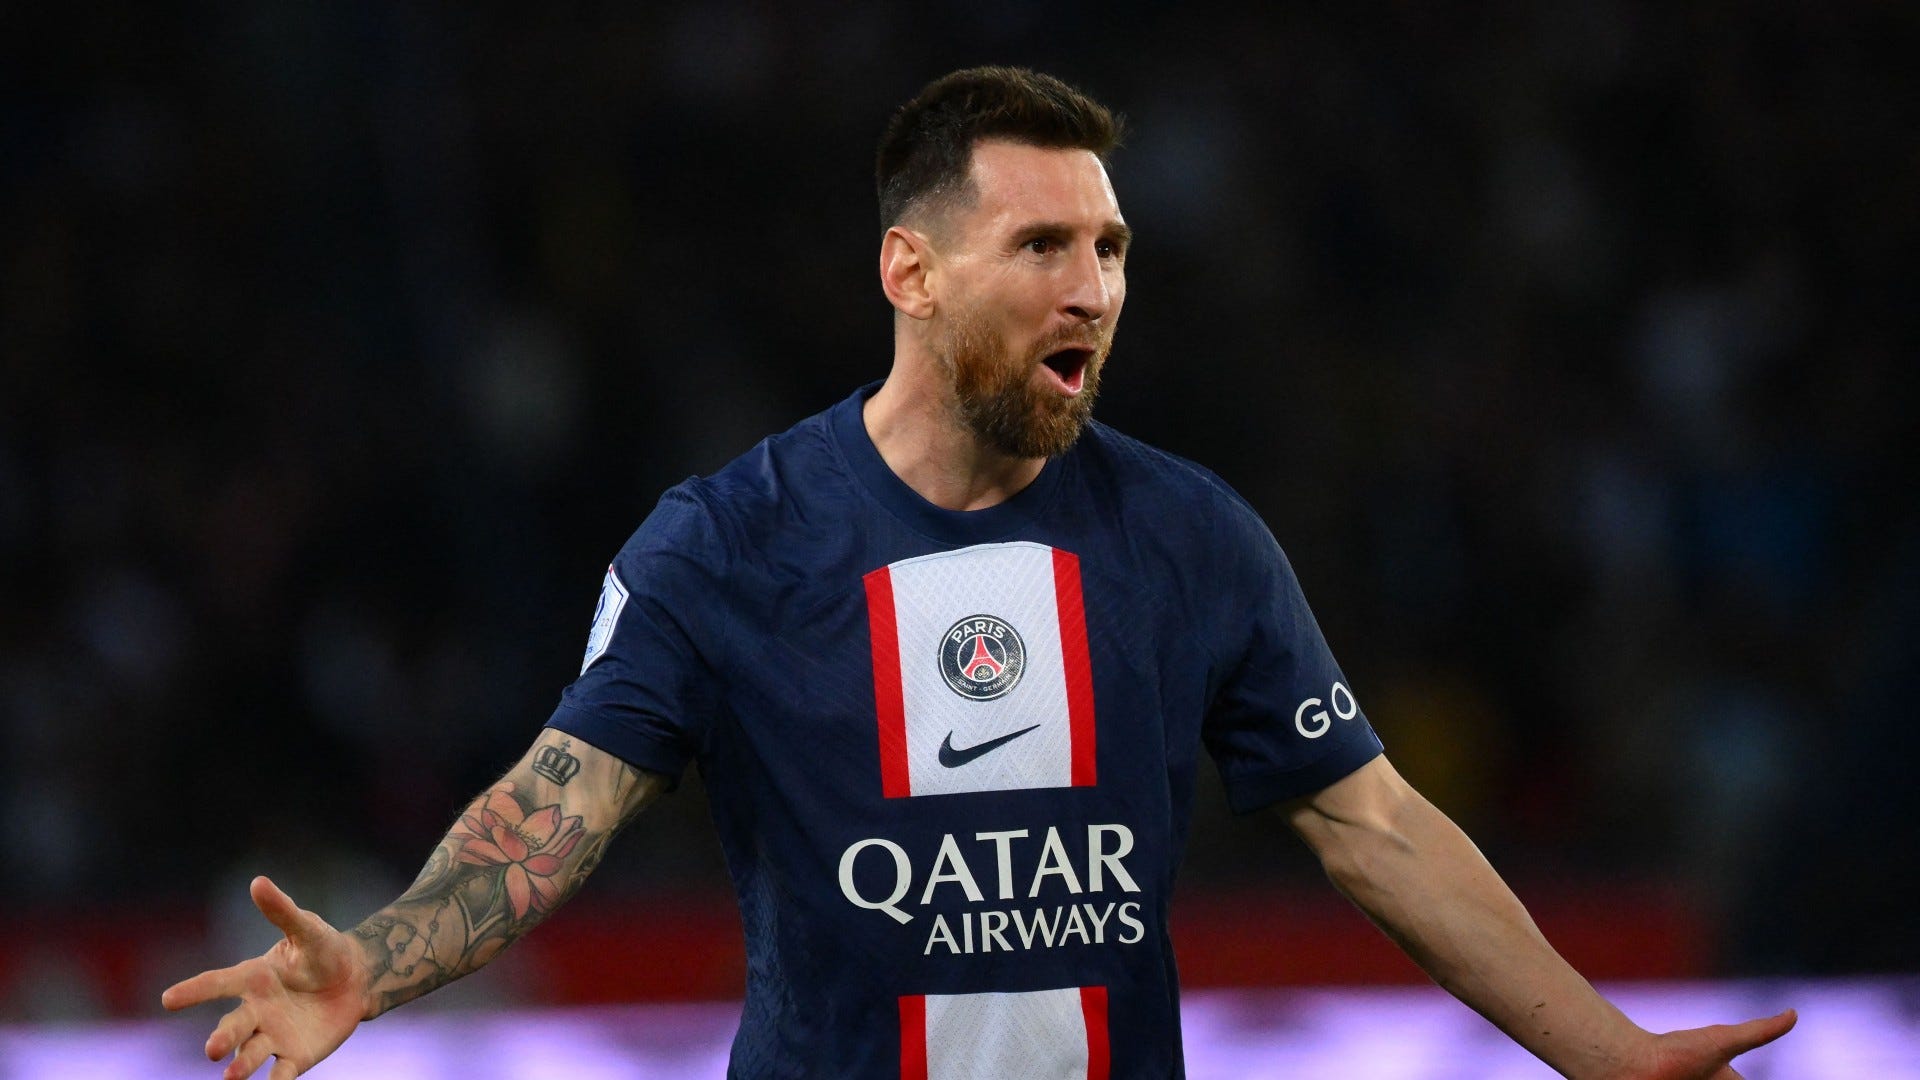 WATCH: Messi scores wonderful free-kick to give PSG the lead vs Nice - Goal.com